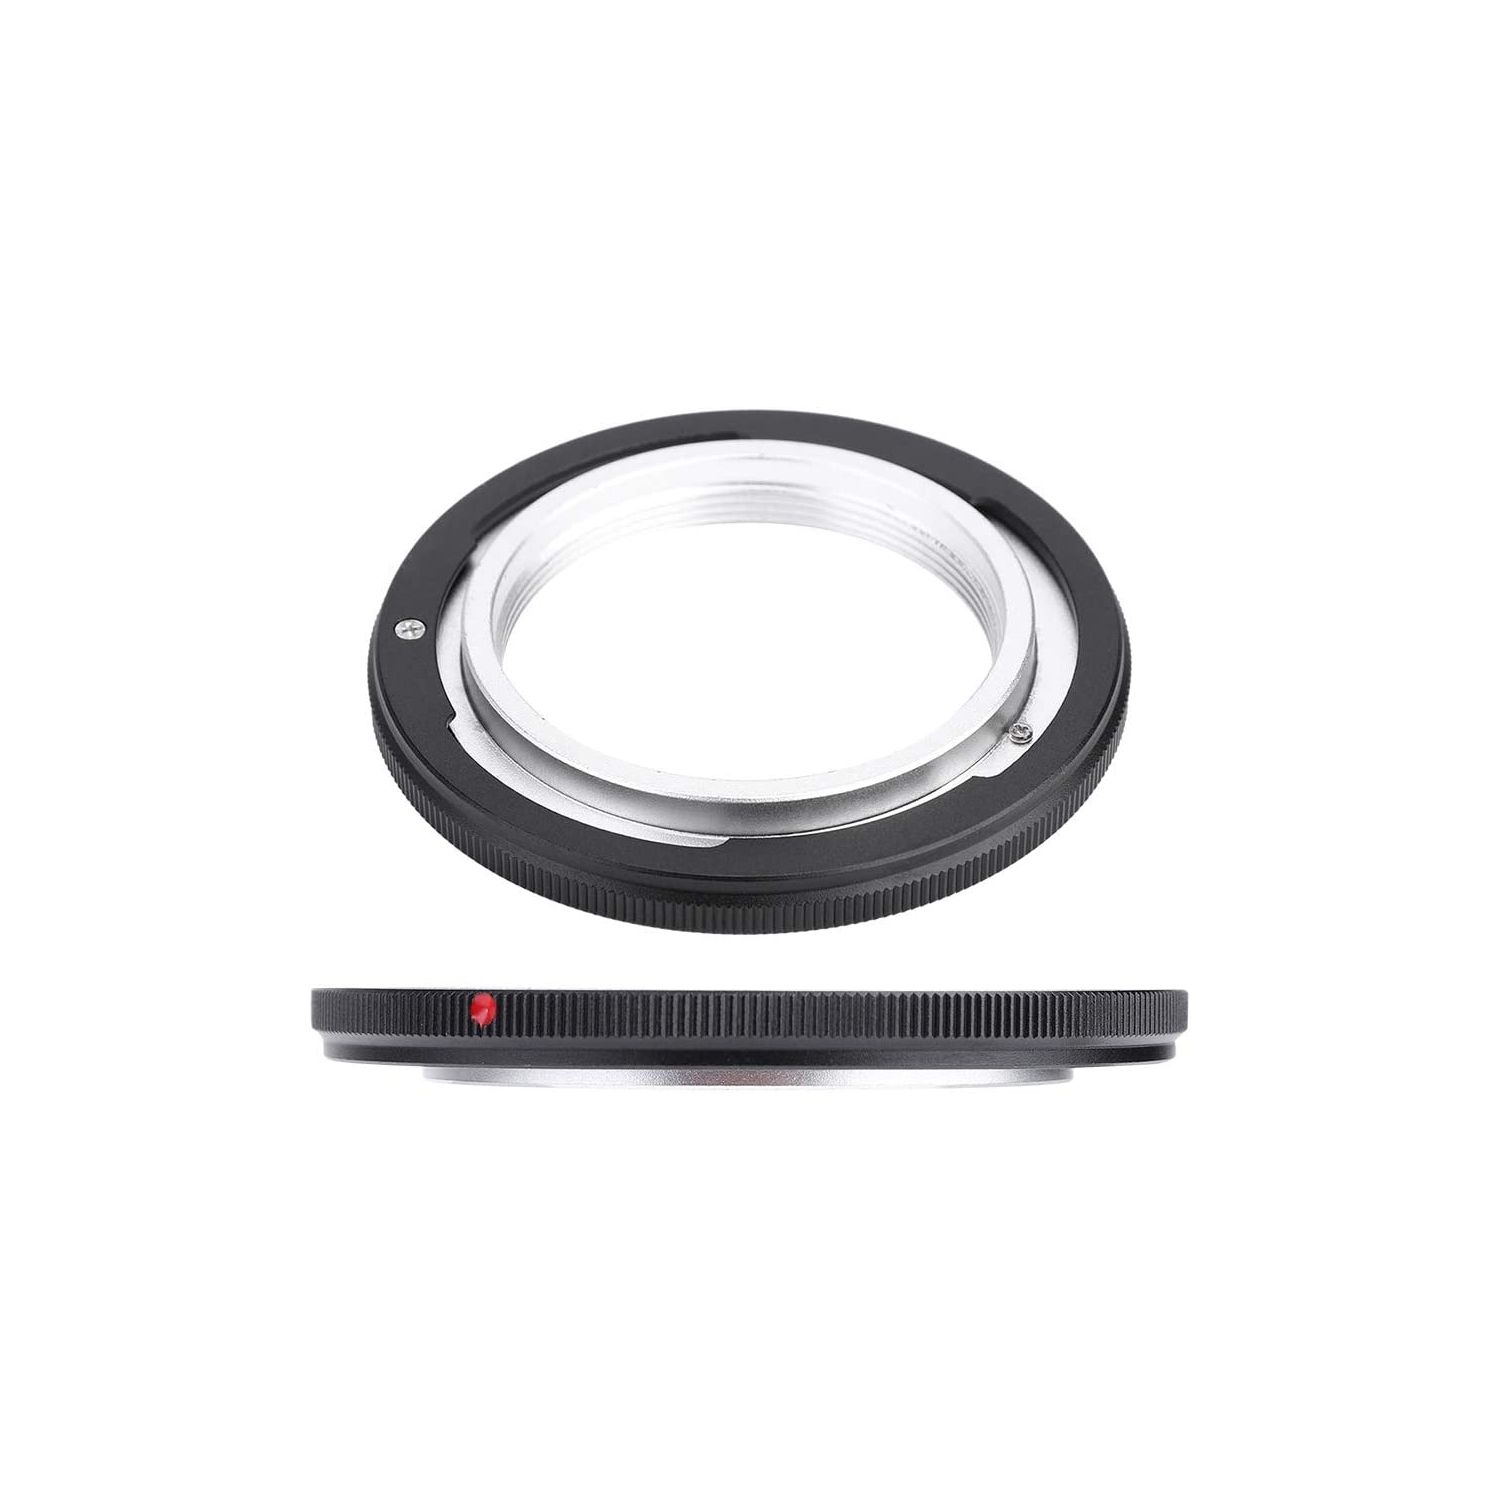 M42-FD M42 Lens Adapter Ring, M42-FD M42 Camera Adapter for Canon FD F-1 A-1 T60 Function of Focusing Infinity